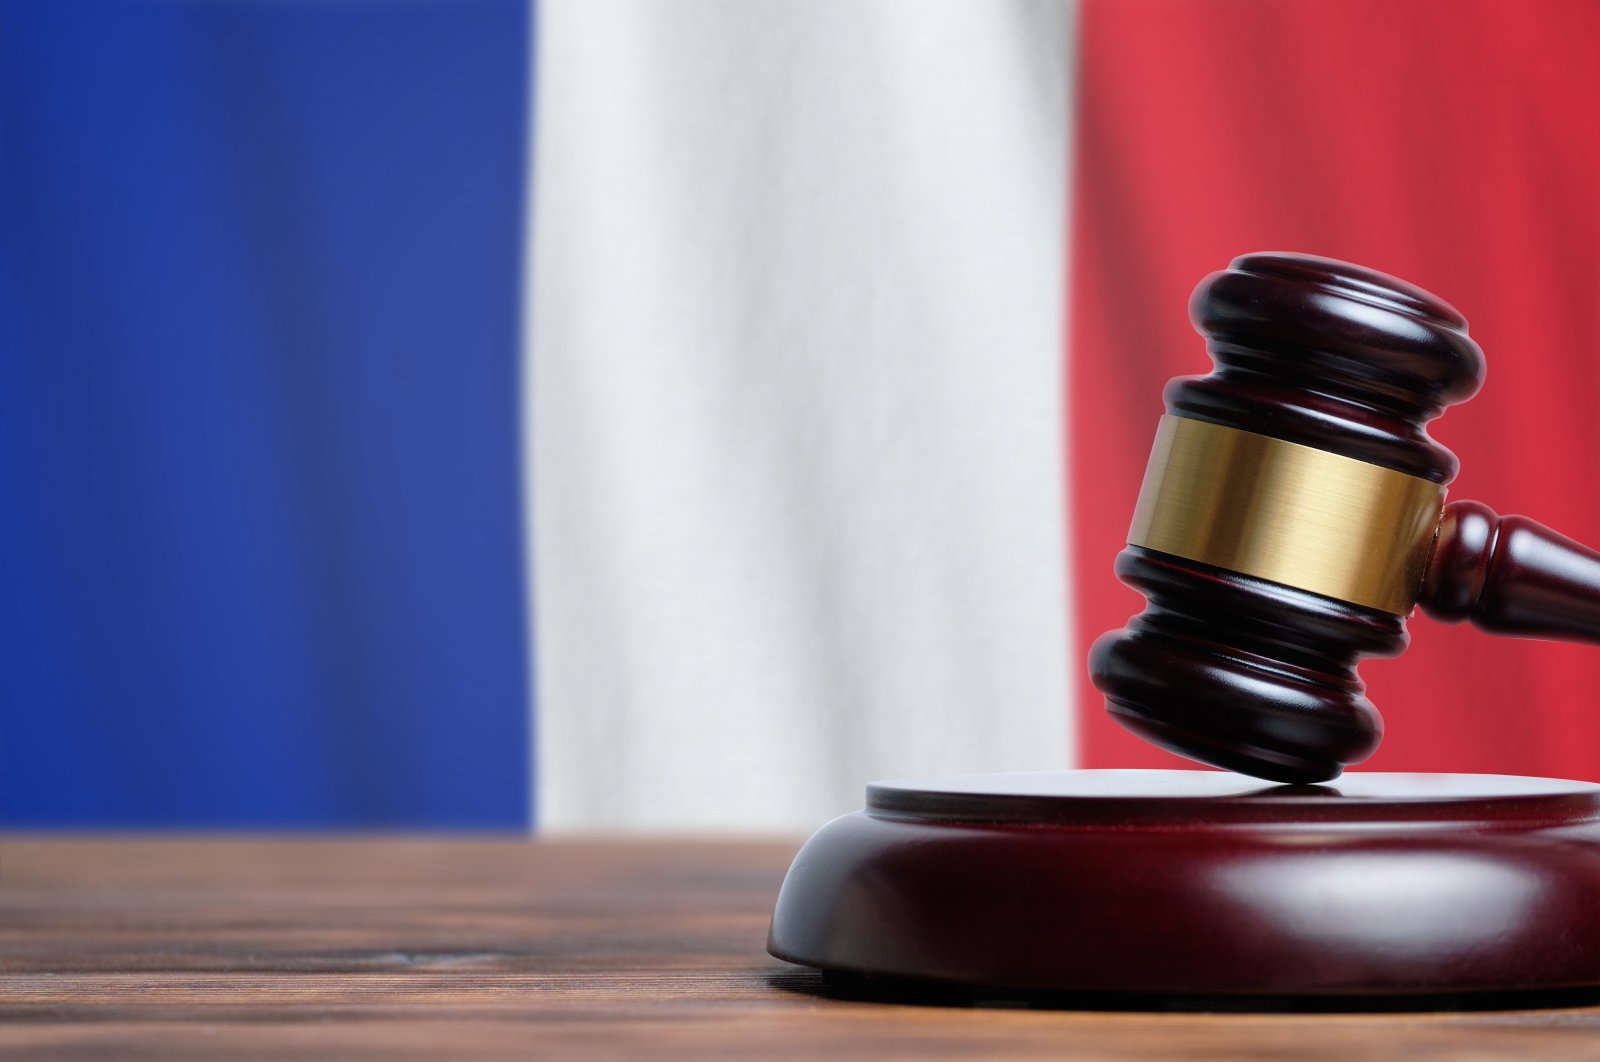 Judge hammer on a French flag background in this undated file photo. (Shutterstock File Photo)